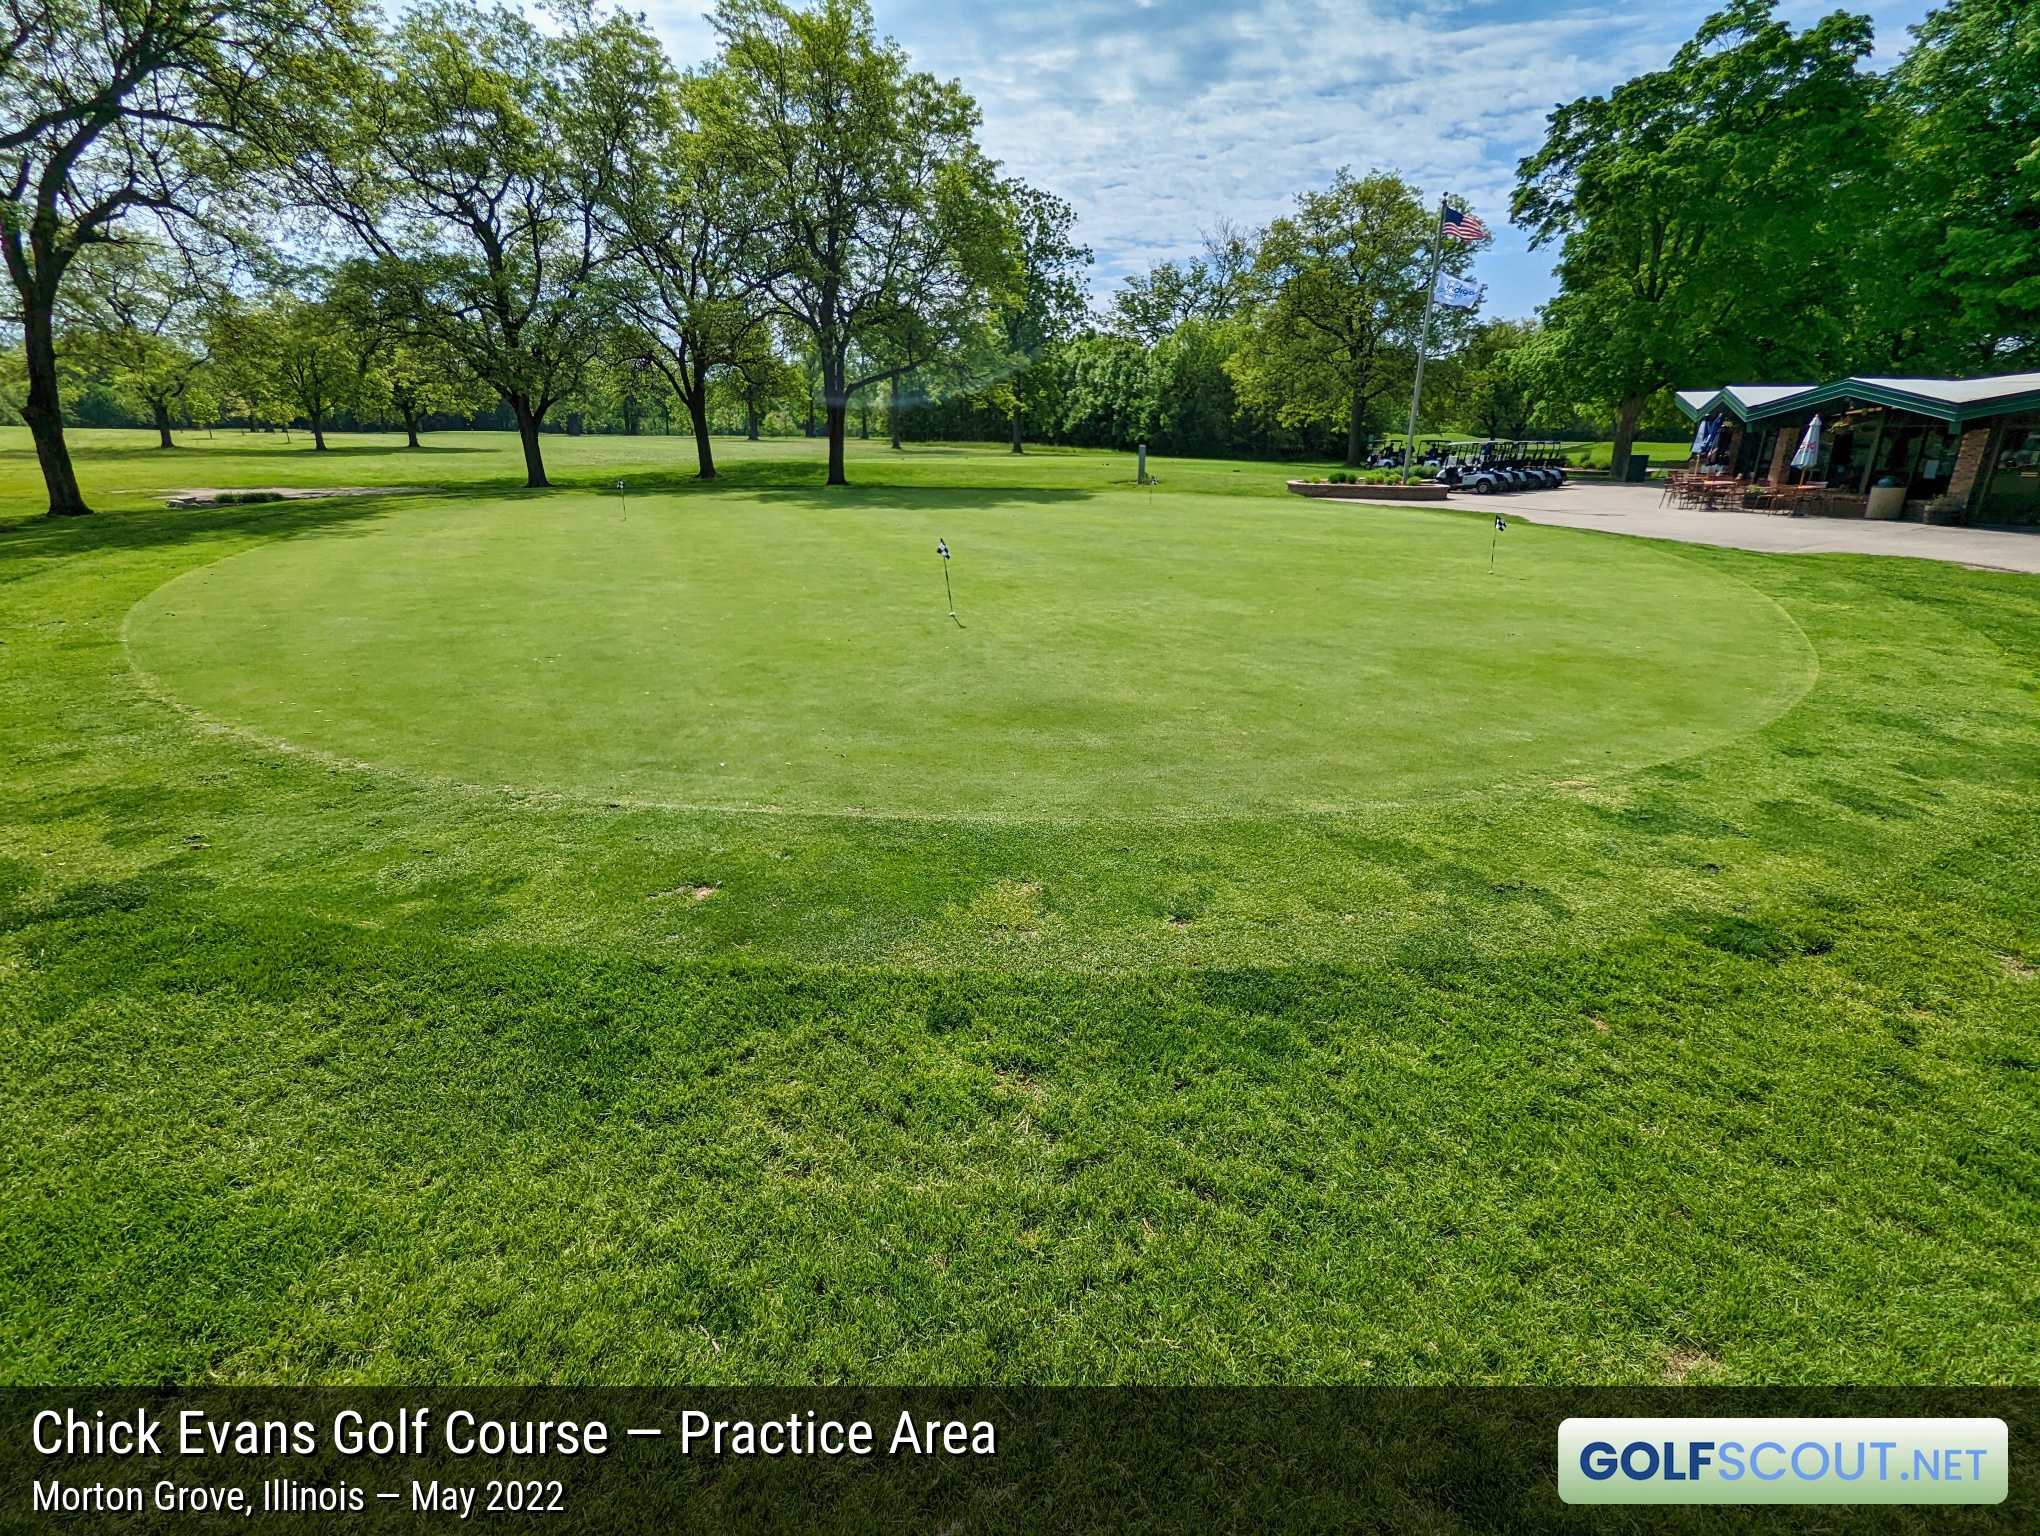 Photo of the practice area at Chick Evans Golf Course in Morton Grove, Illinois. 